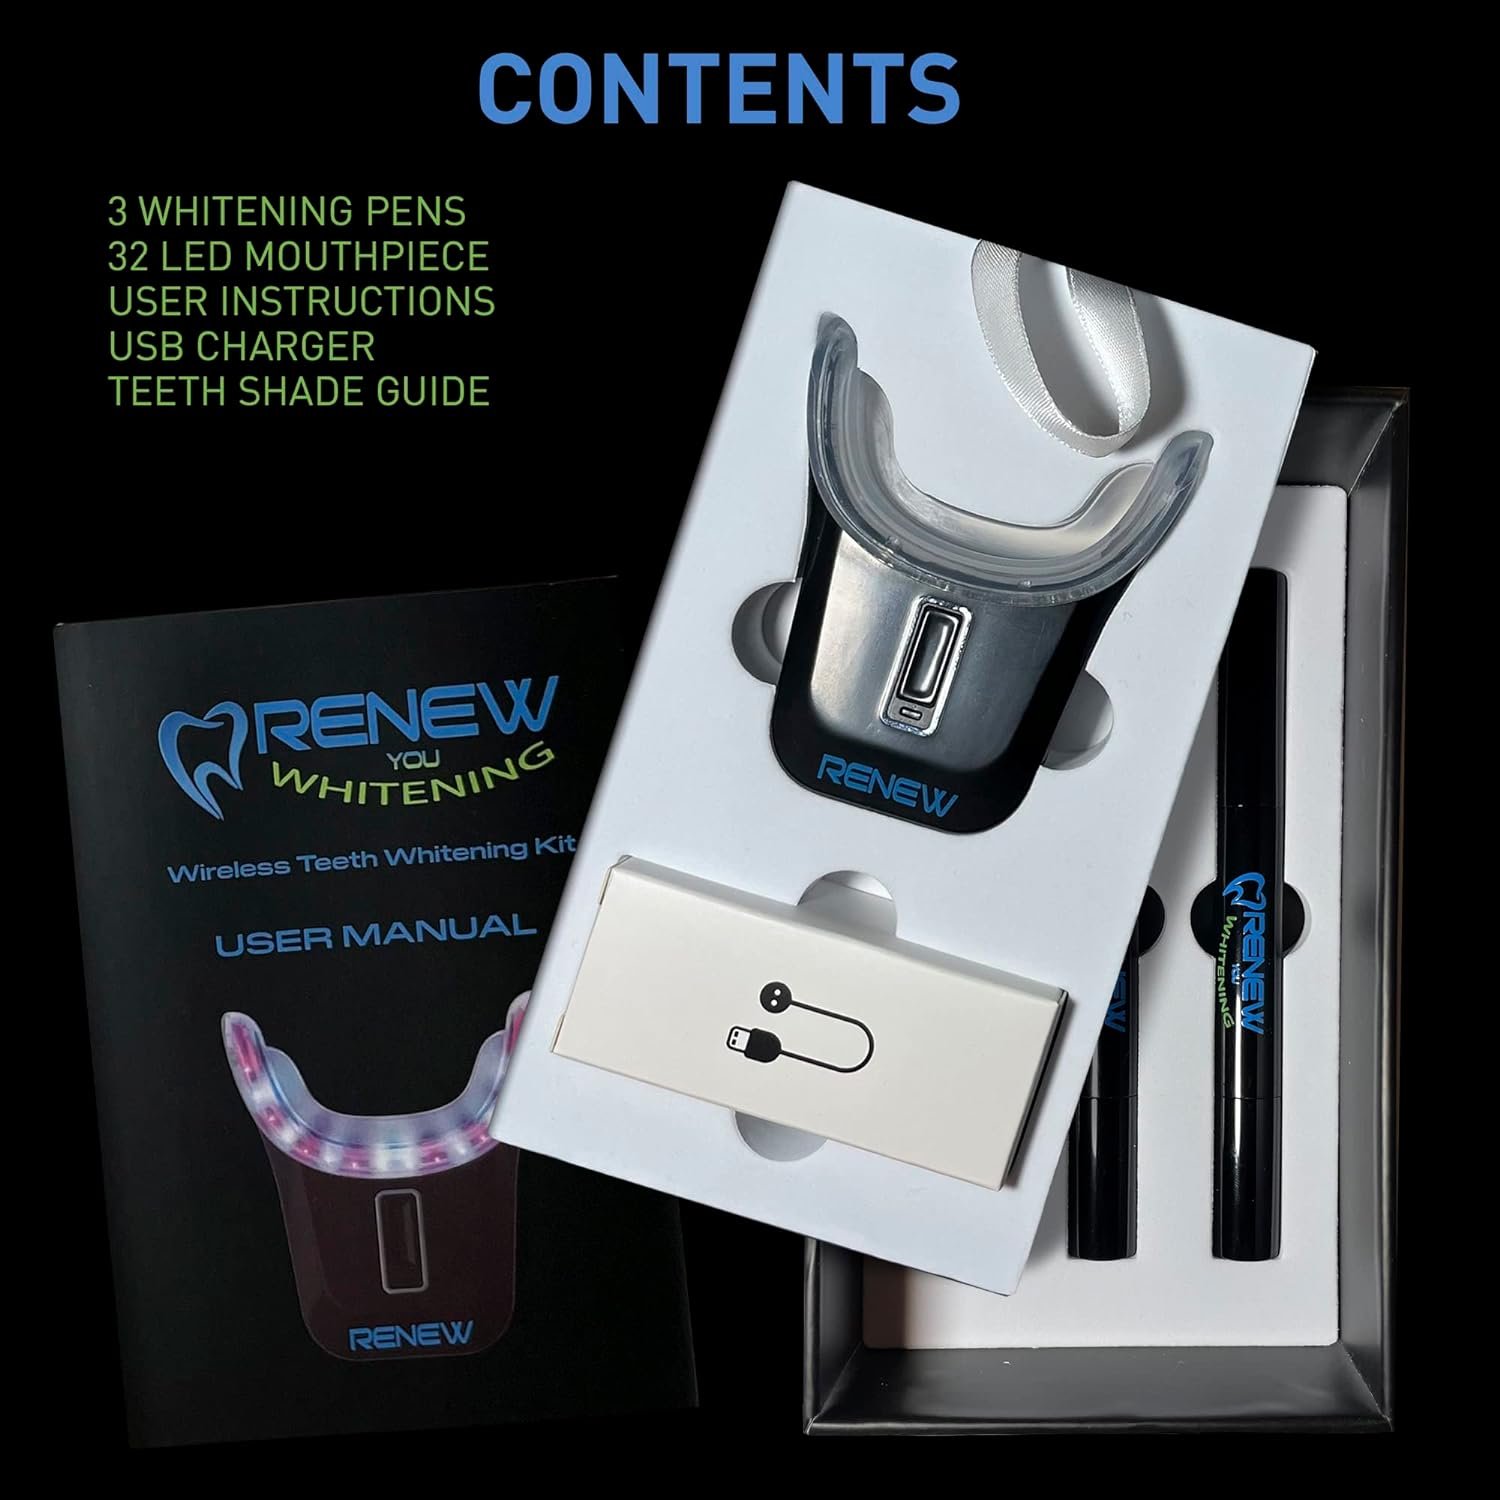 ReNewYou Teeth Whitening Kit with 3 Non-Sensitive Whitening Pens, Wireless Multicolor 32 LED Mouthpiece, 20+ Whitening Treatments, Teeth Shade Guide, etc.